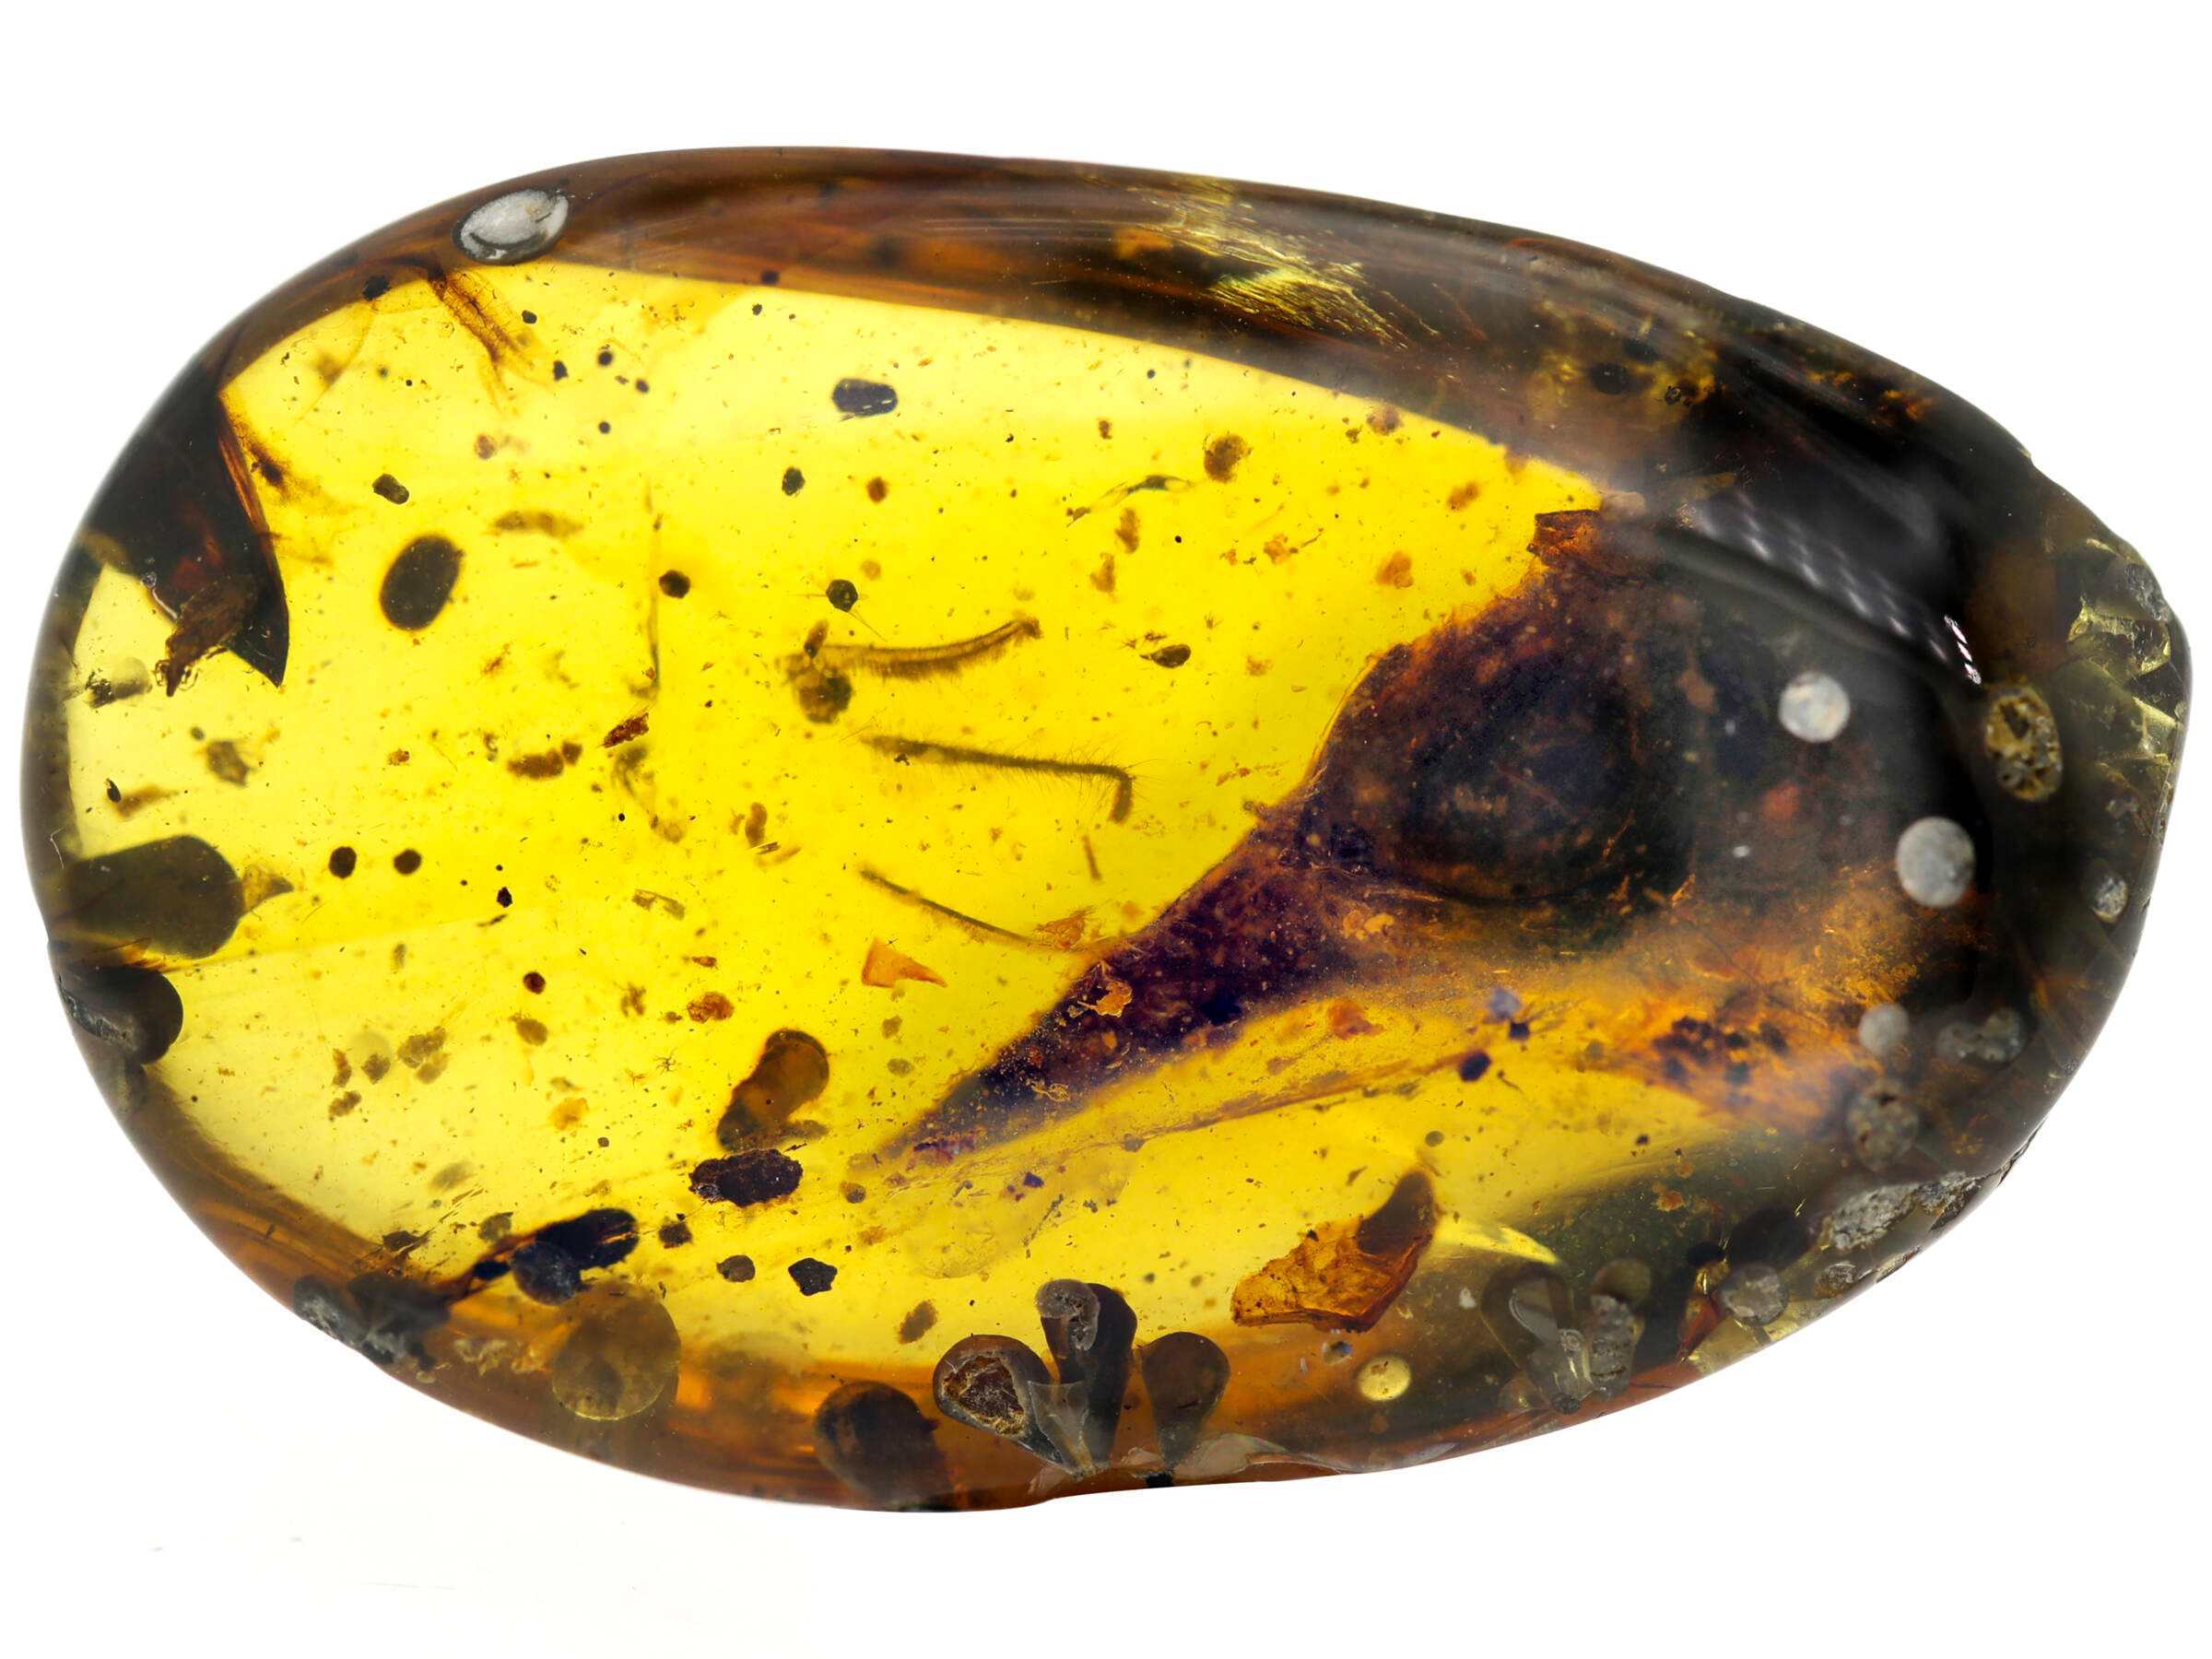 Burmese amber with Oculudentavis skull nearly perfectly preserved inside.